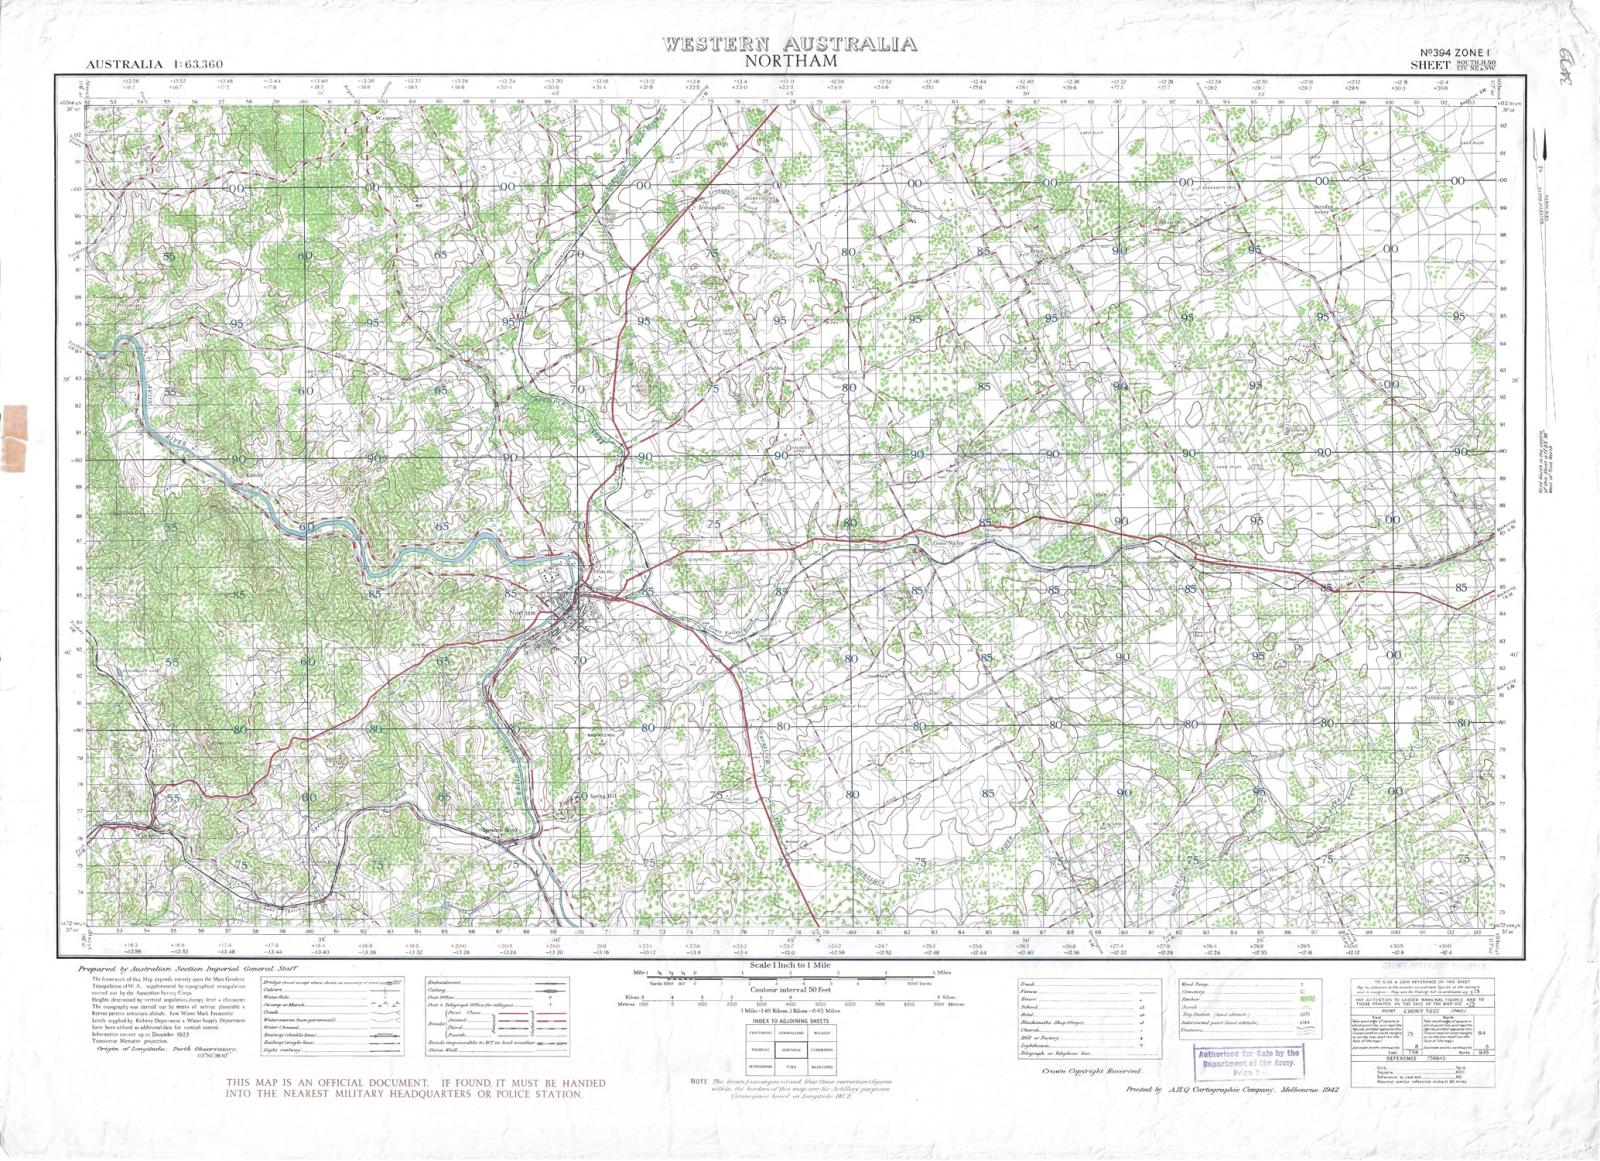 Cadastral / topographic map, Northam & Toodyay